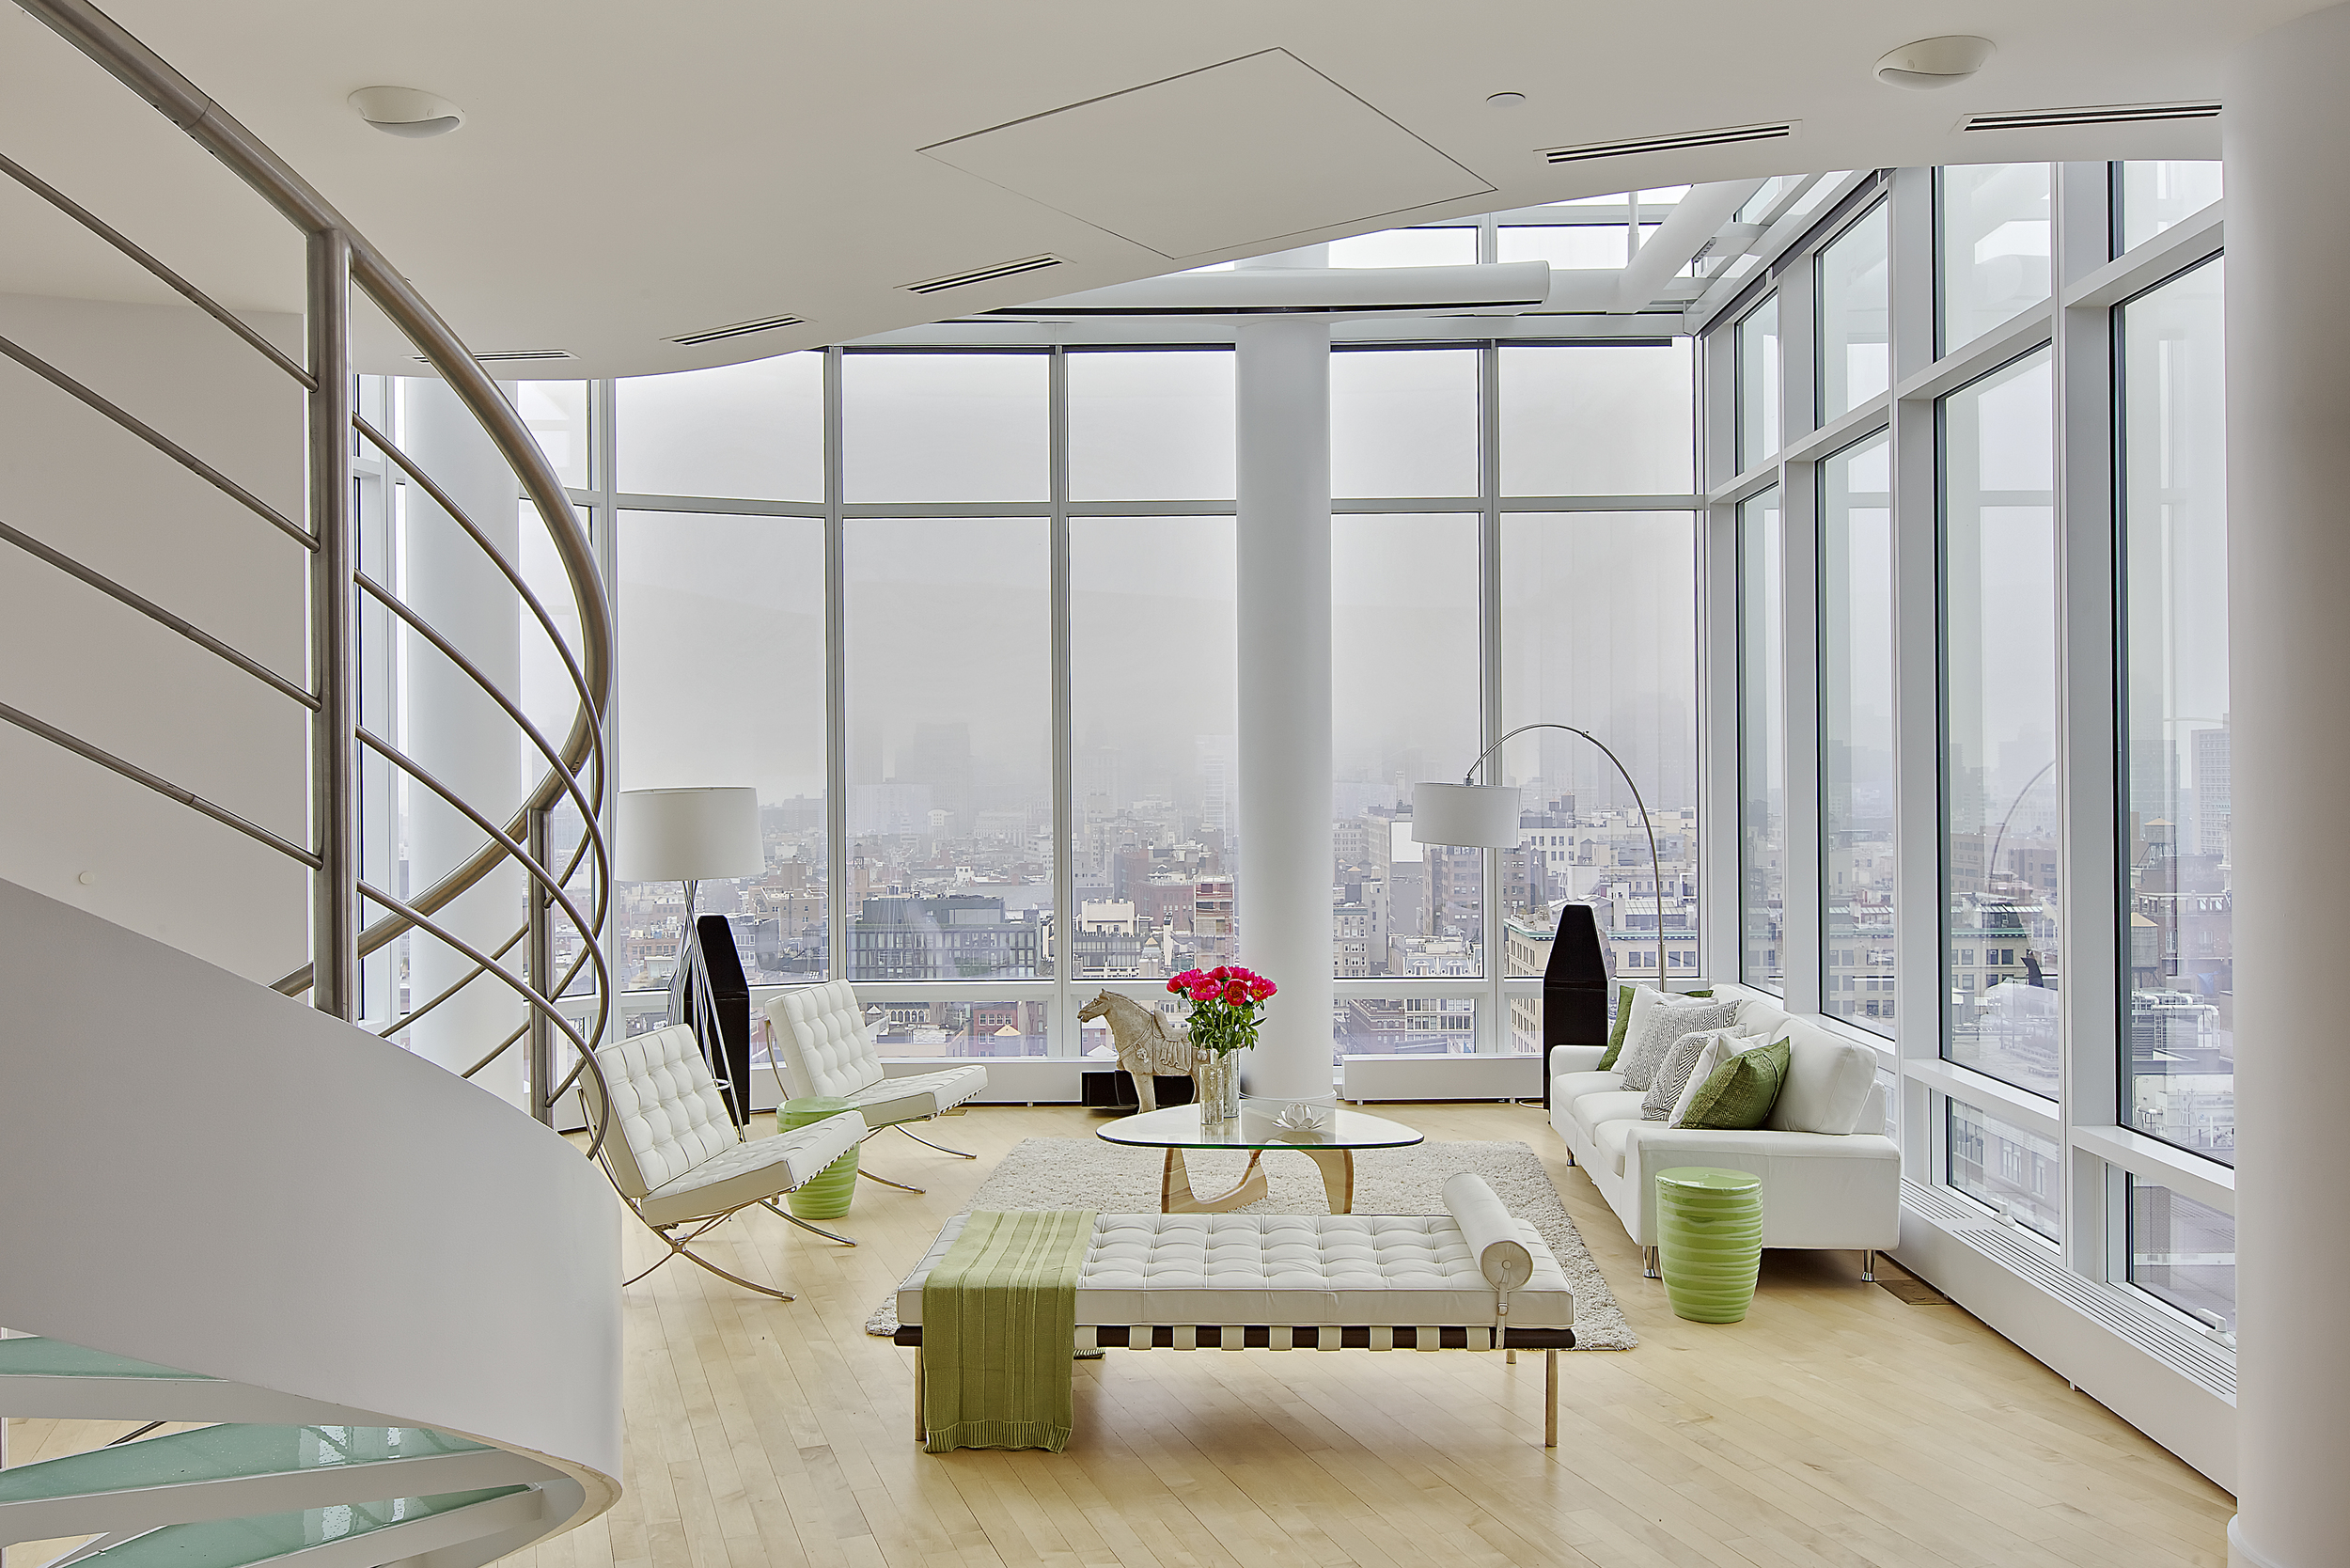   CHELSEA PENTHOUSE DUPLEX   The modern style provides an alluring view of the living room when combined with elegant furnishings. The glass walls and light flooring showcase a perfect combo. A glass coffee table with fresh red flowers complements th